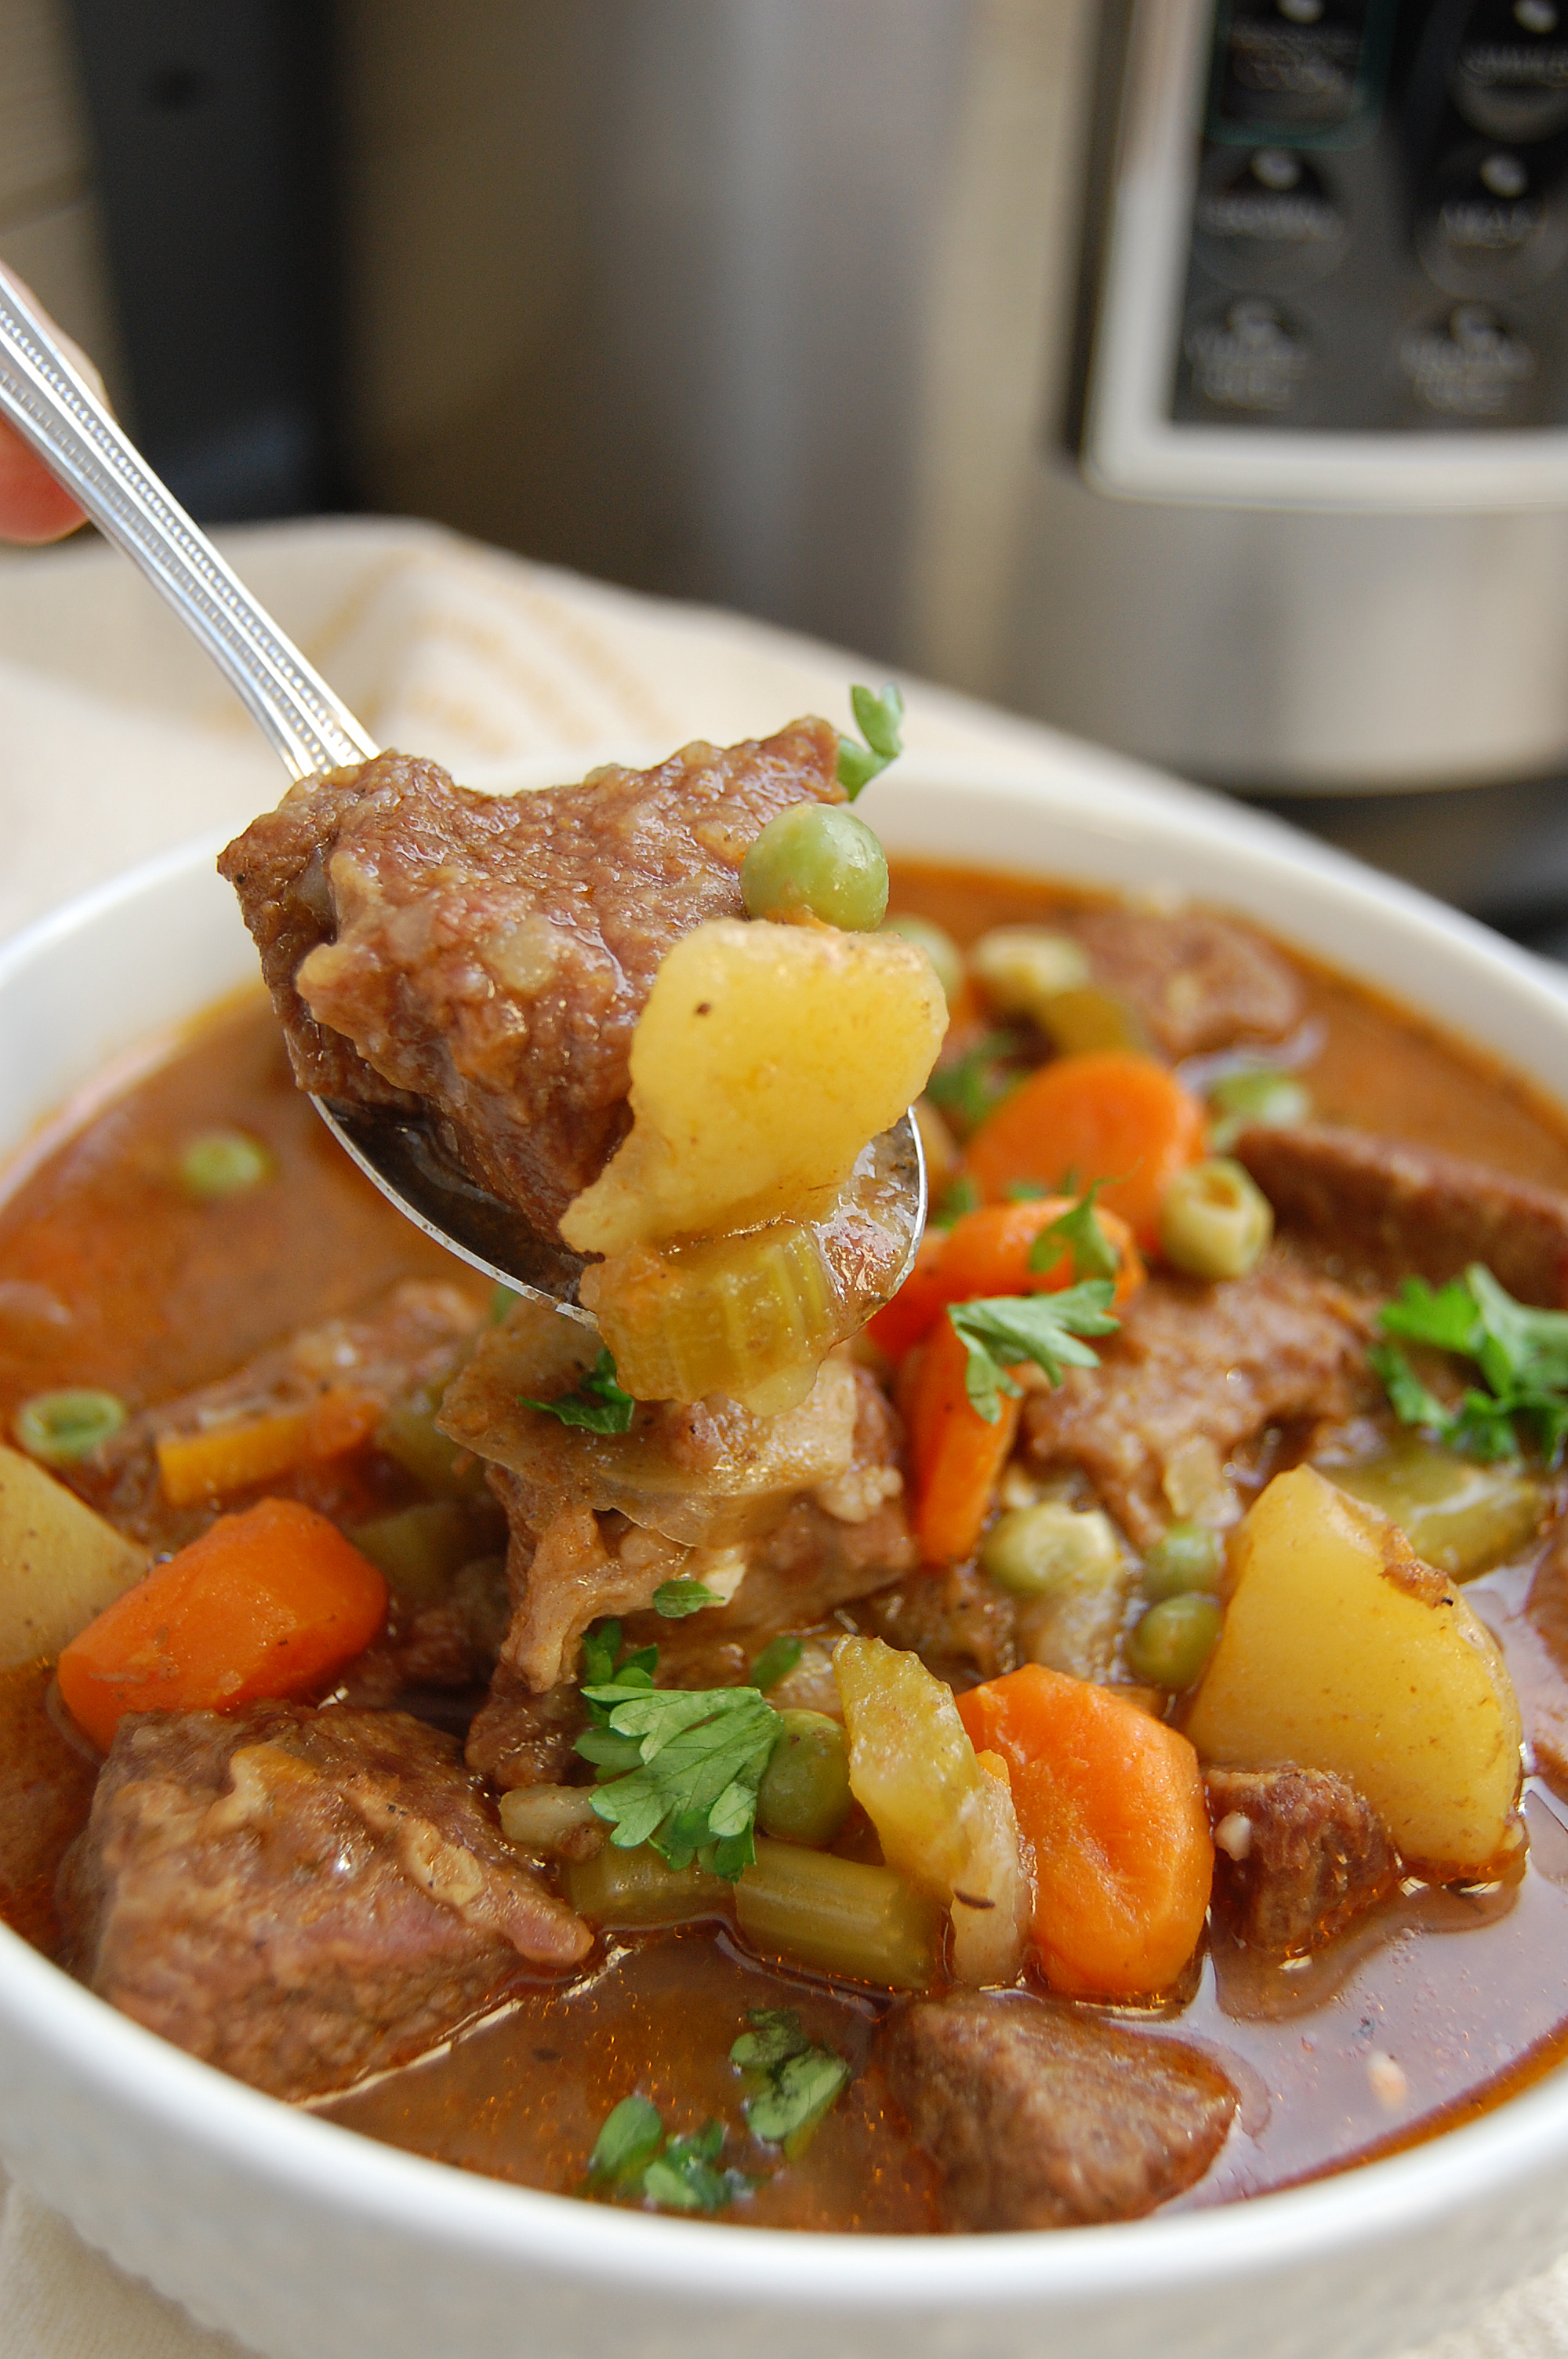 Here's a tasty main dish you can make in a pressure cooker. (NDSU photo)